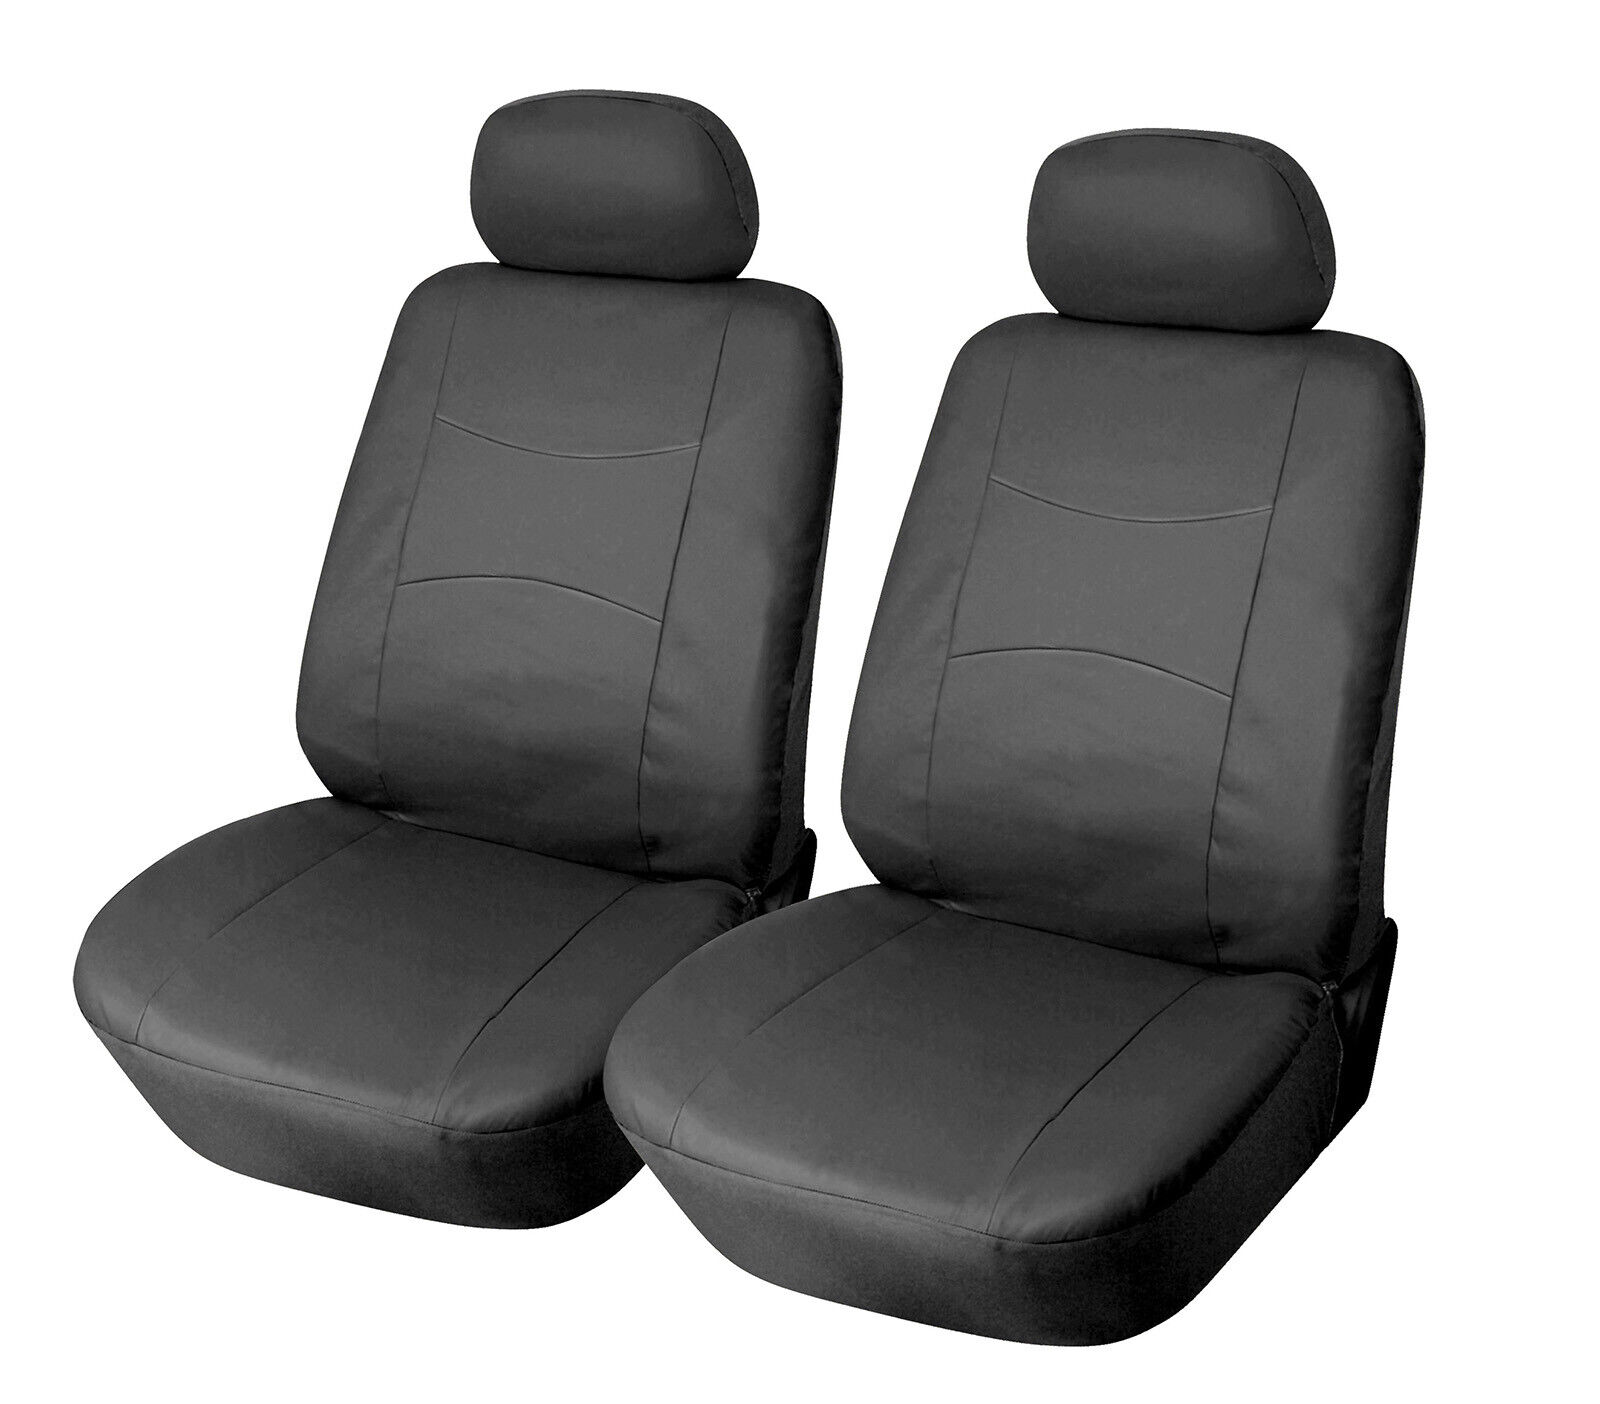 Leather like 2 Front Car Seat Covers for Toyota #7159